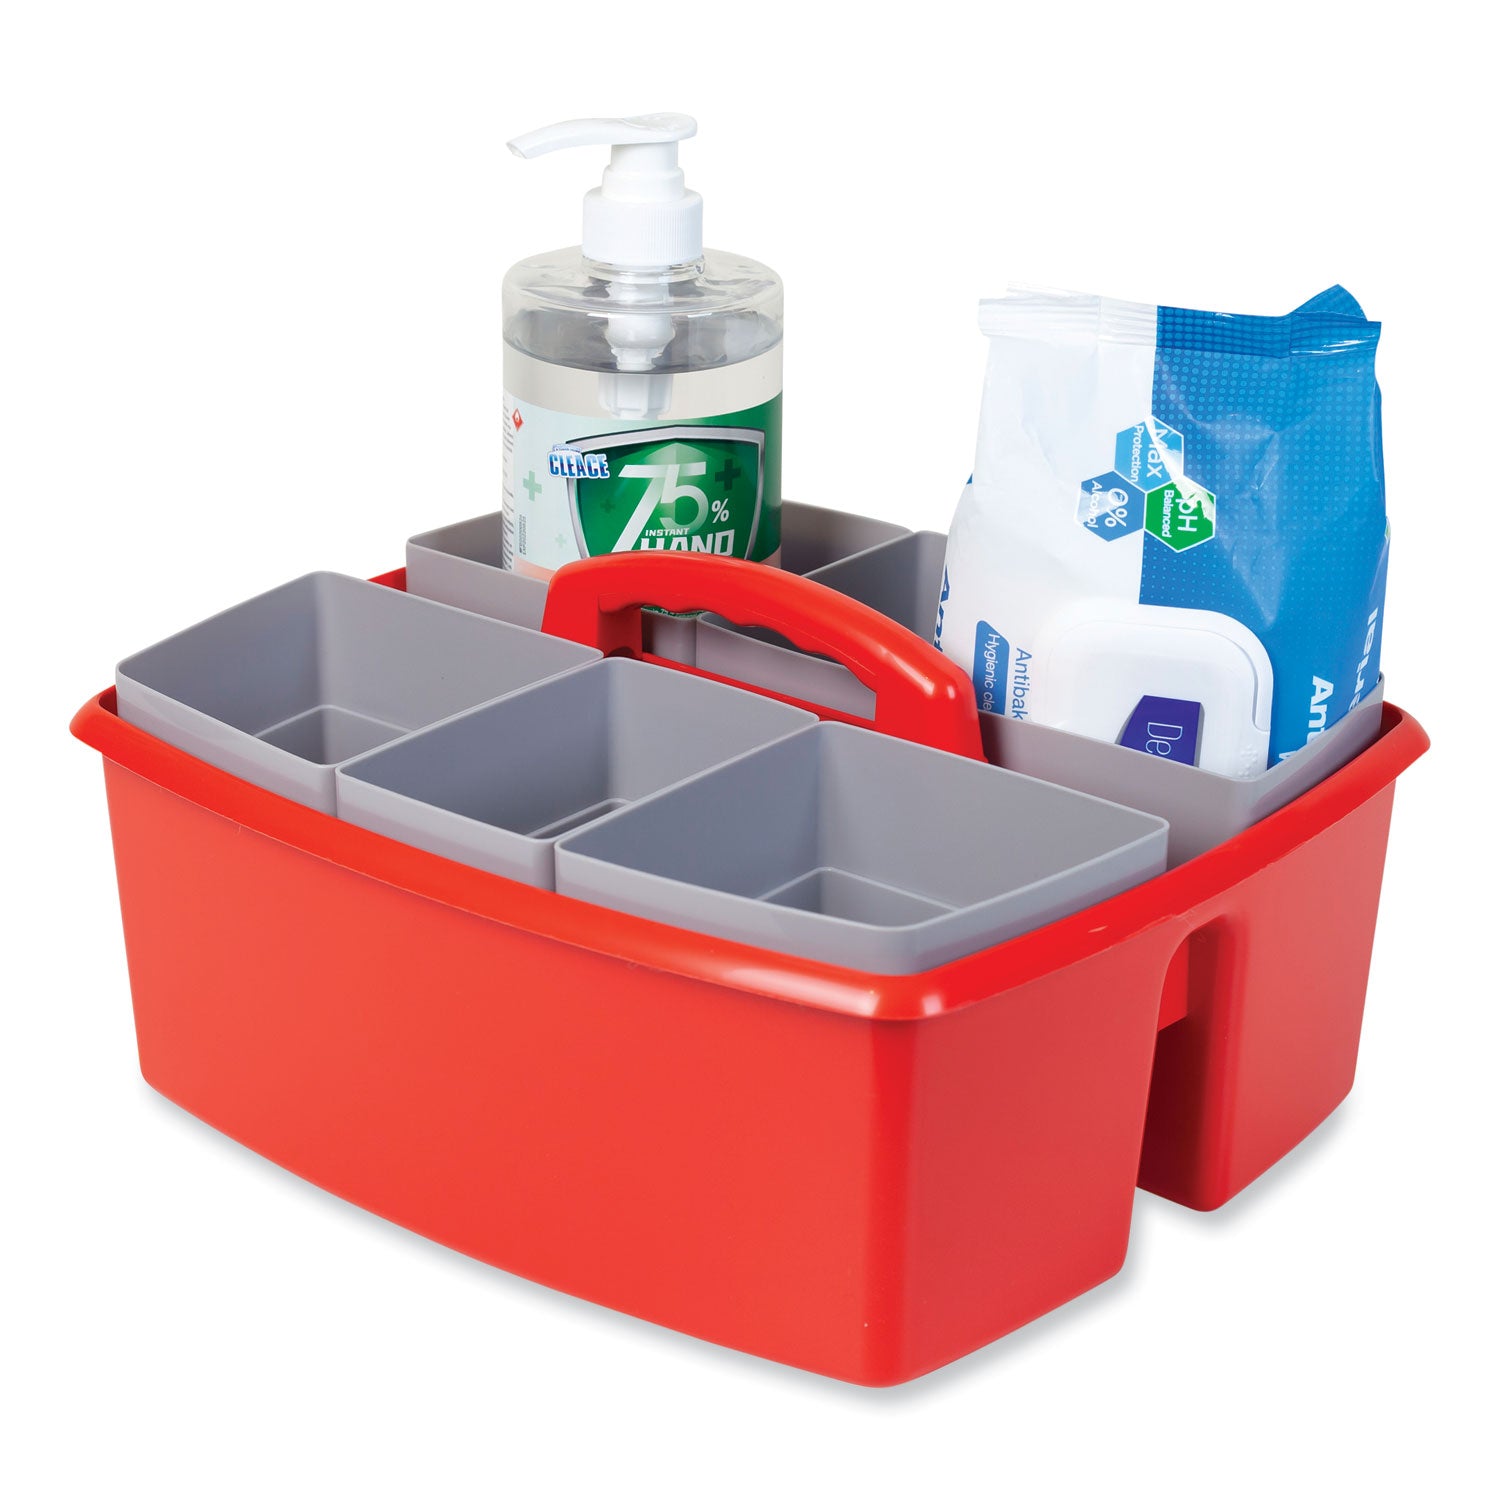 large-caddy-with-sorting-cups-red-2-carton_stx00981u02c - 5